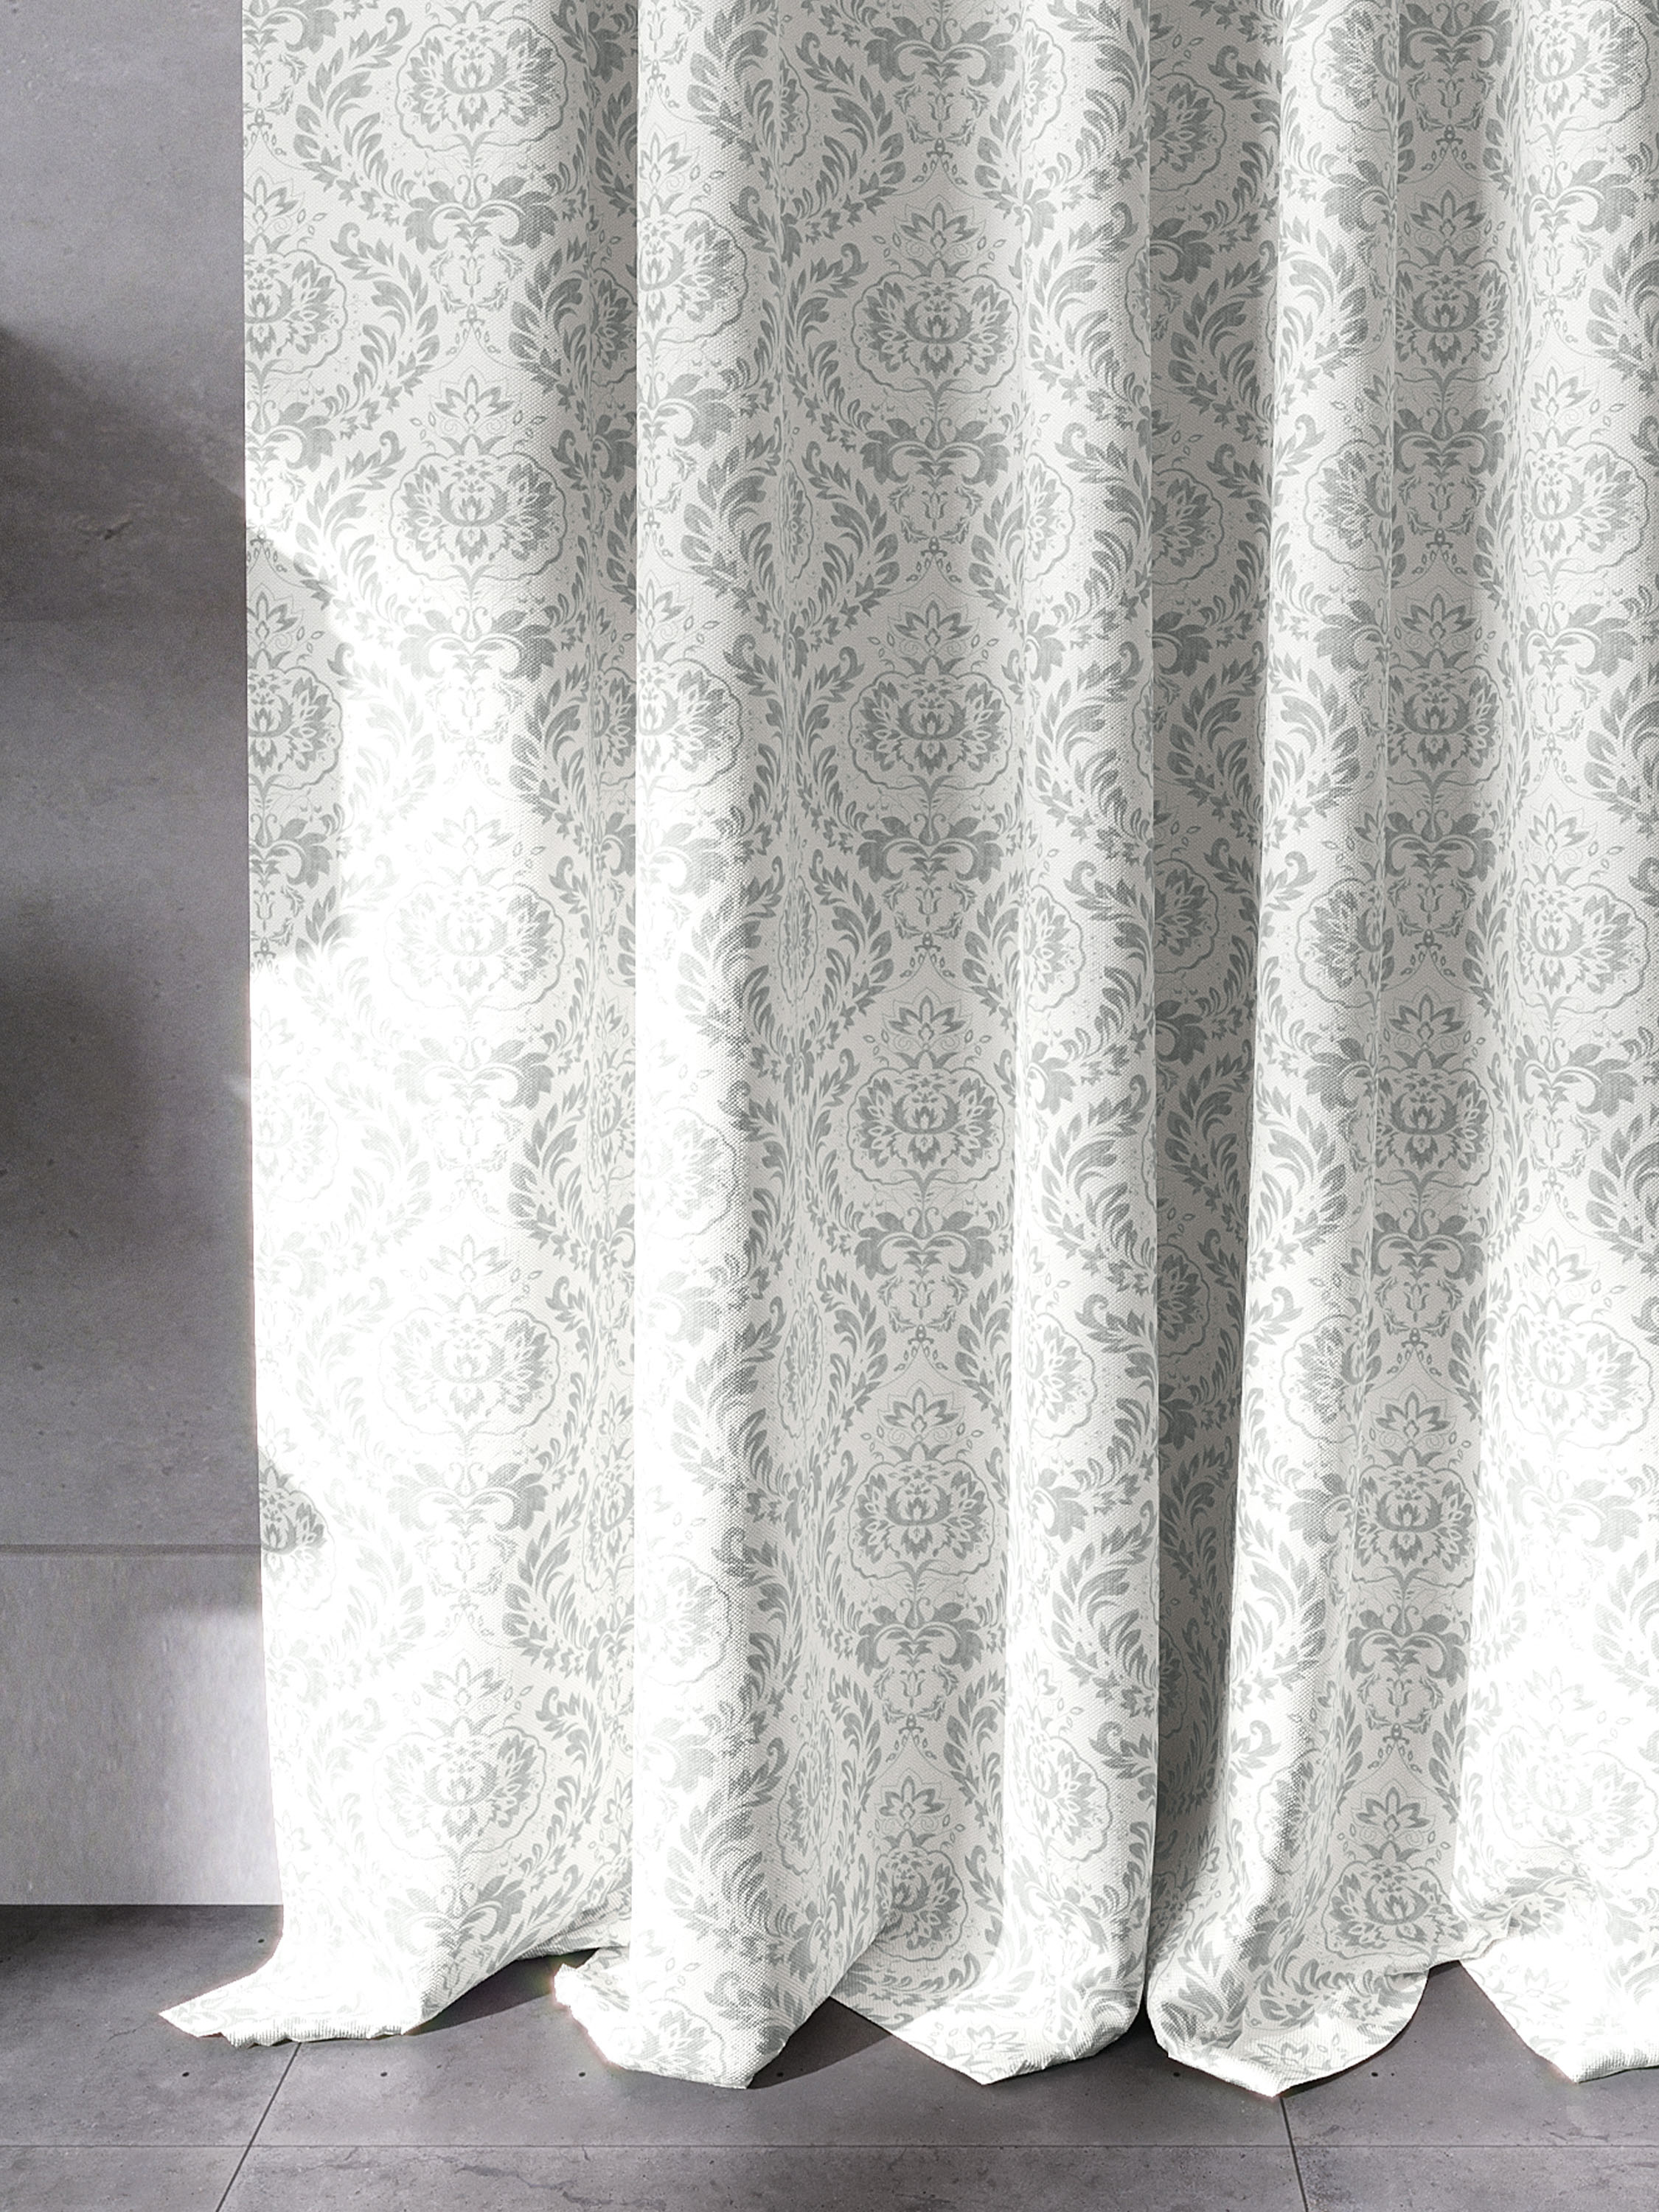 A classic damask pattern is printed on a textured semi-sheer fabric curtain